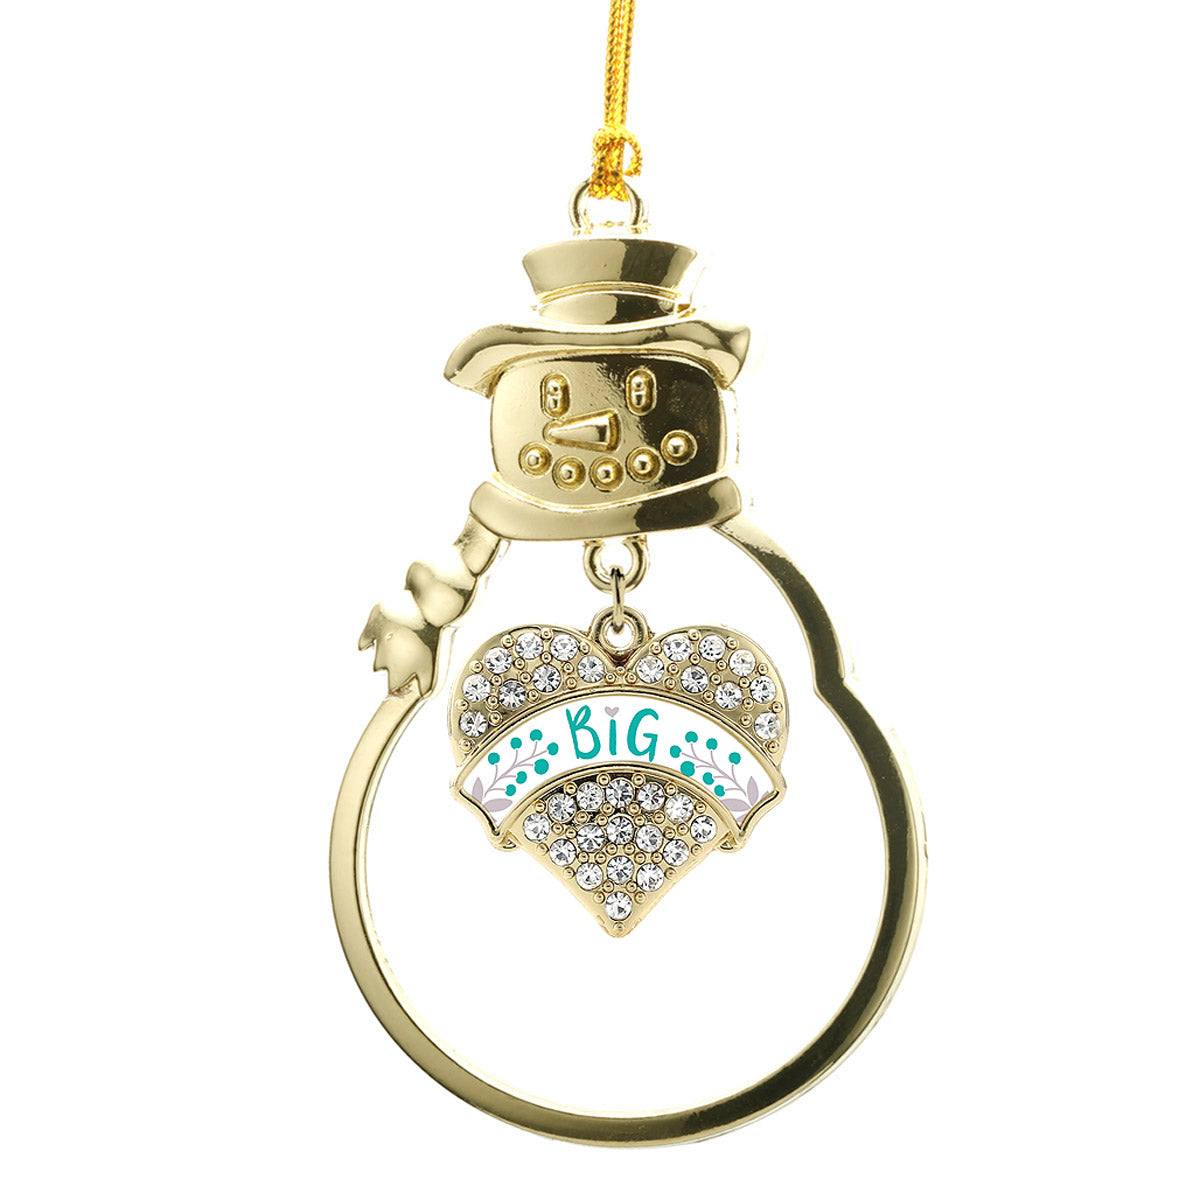 Gold Teal and Gray Big Pave Heart Charm Snowman Ornament